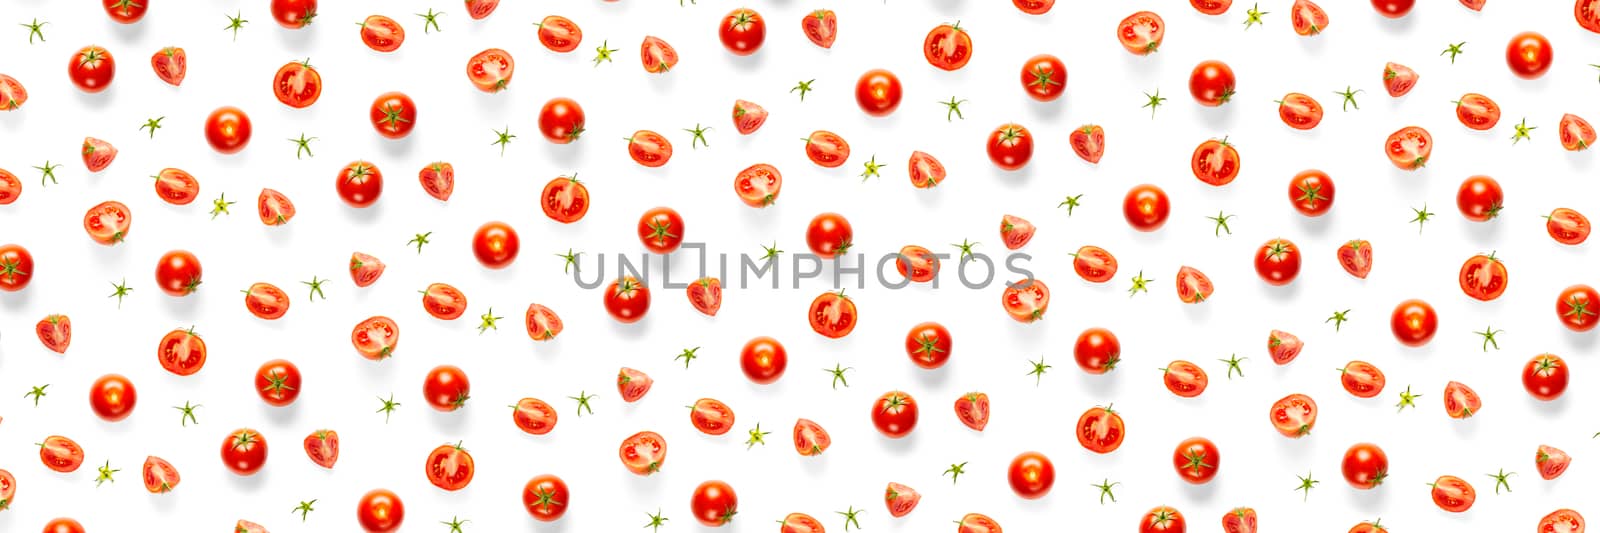 banner - creative background from red tomatoes. Abstract background. of isolated ripe Tomato on the white background not seamless pattern by PhotoTime